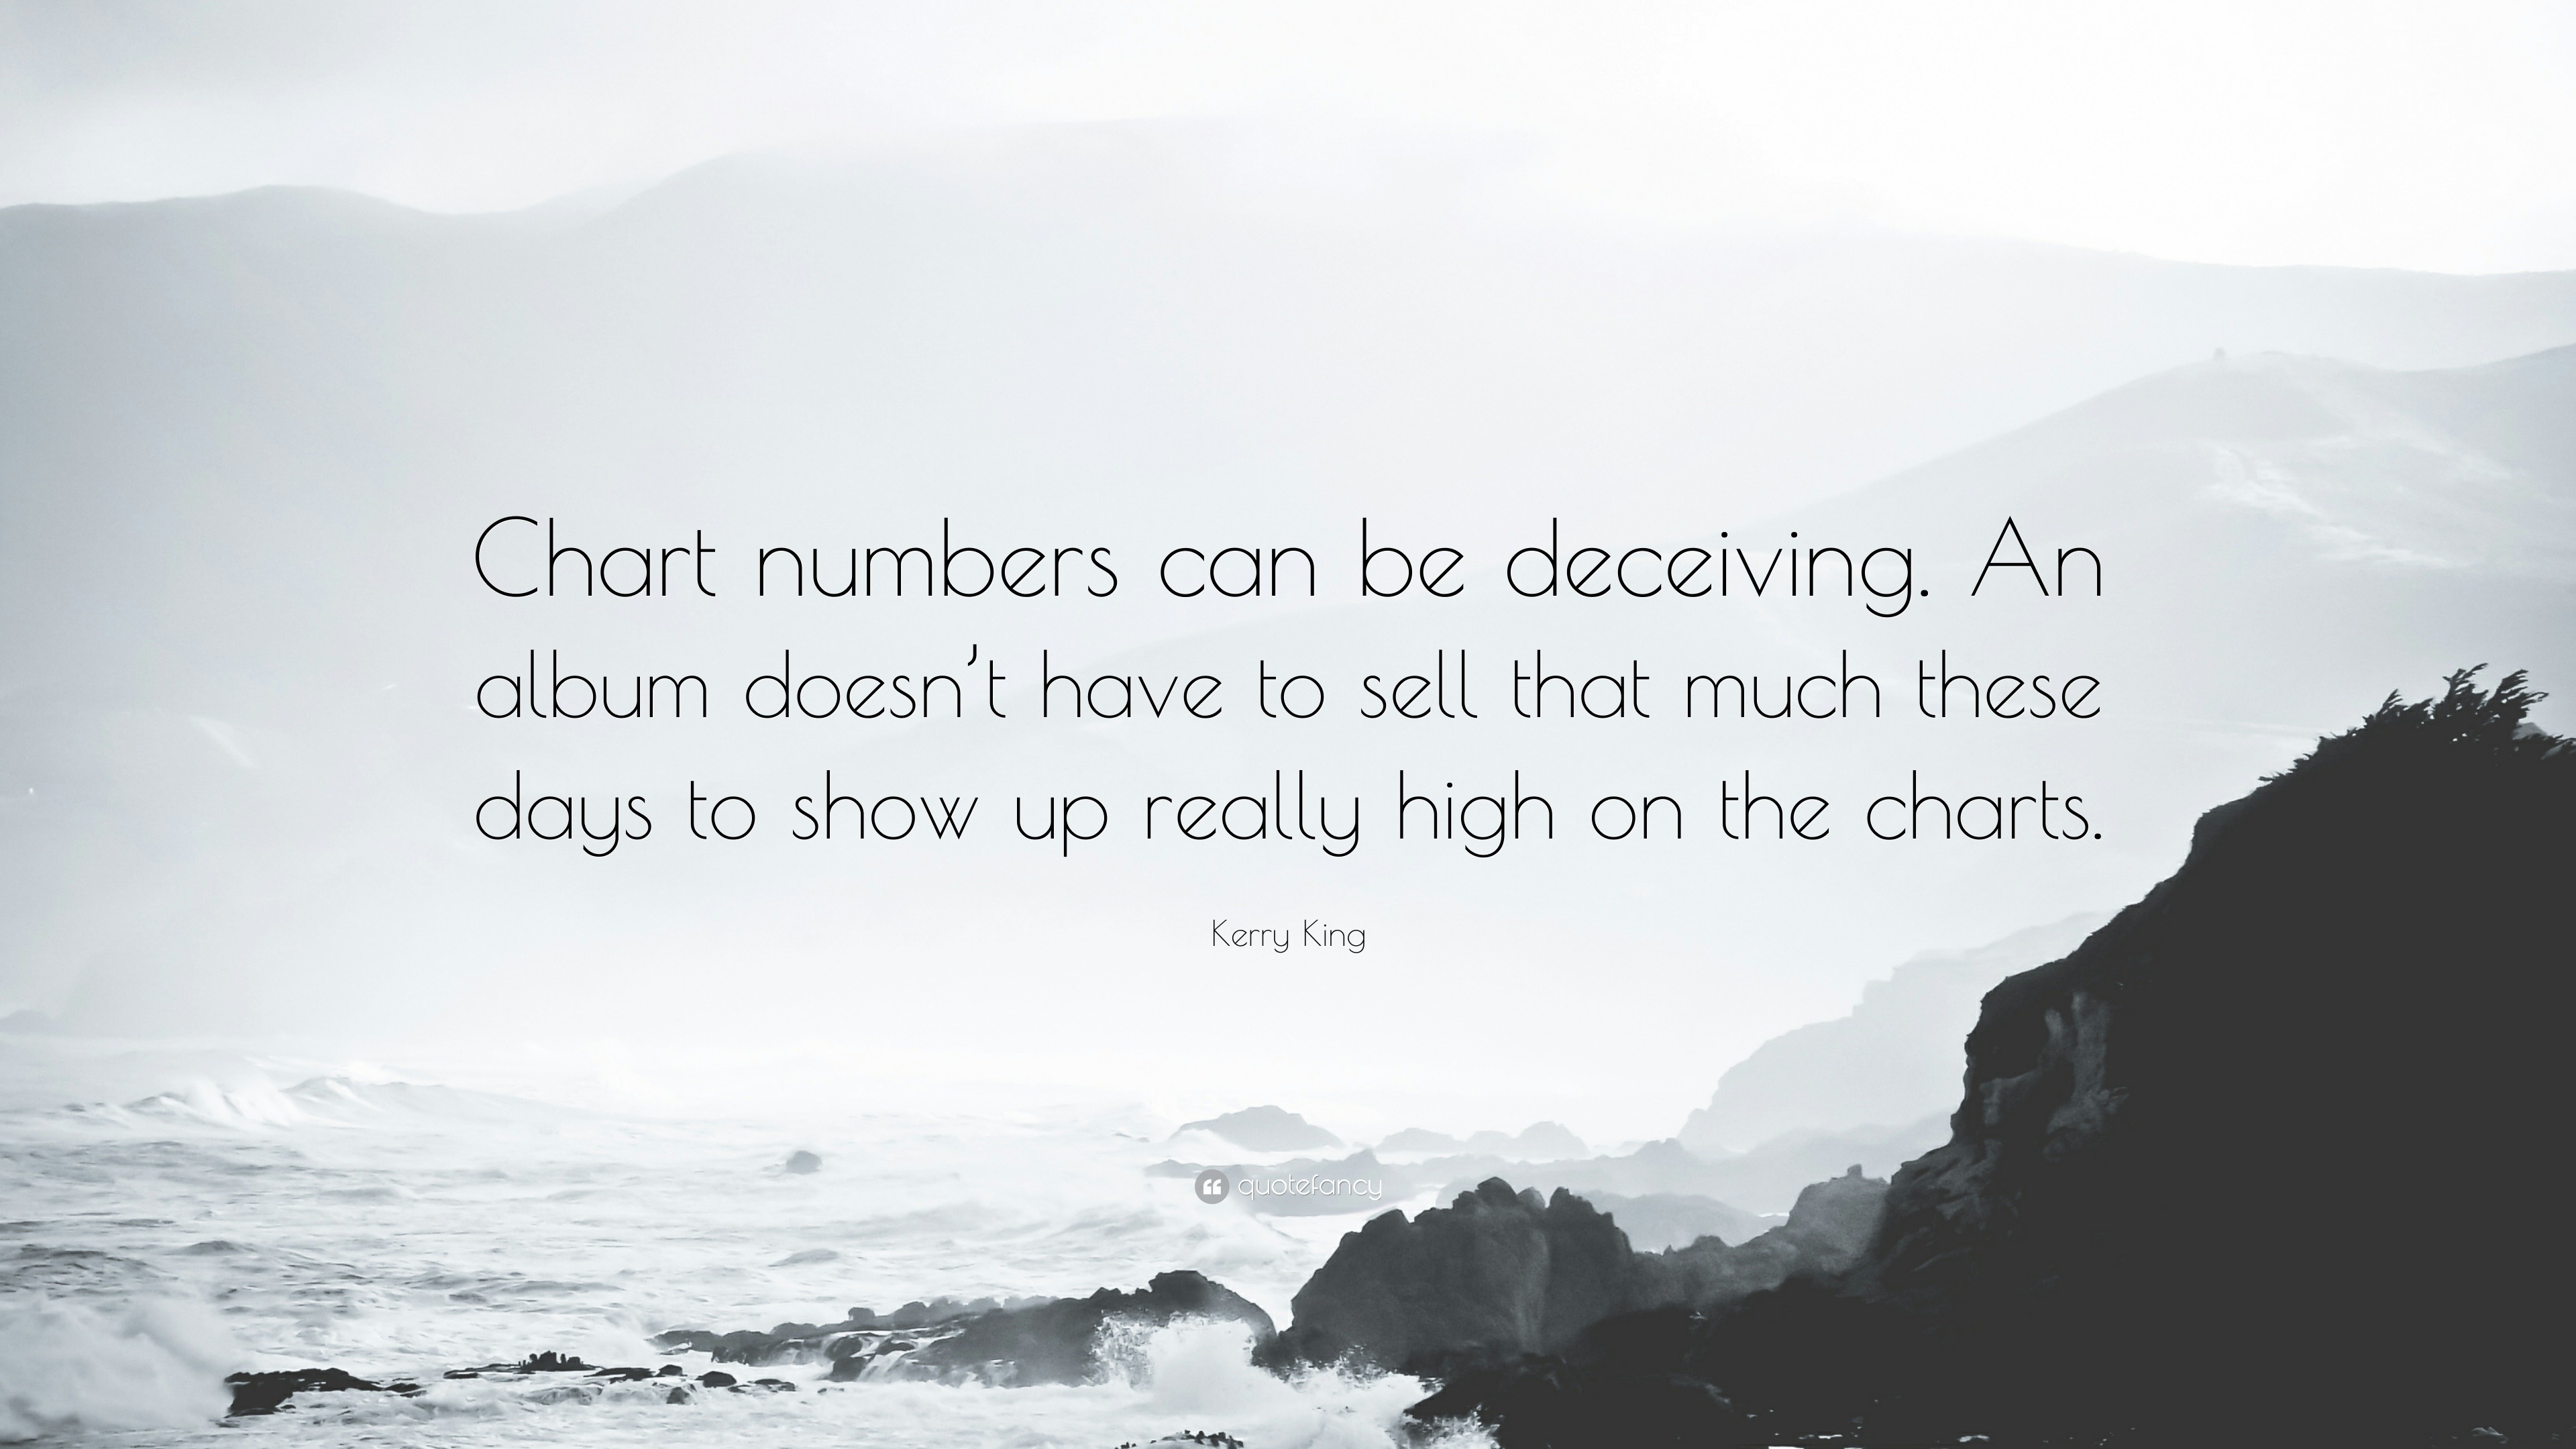 Kerry King Quote Chart Numbers Can Be Deceiving An Album Doesn T Have To Sell That